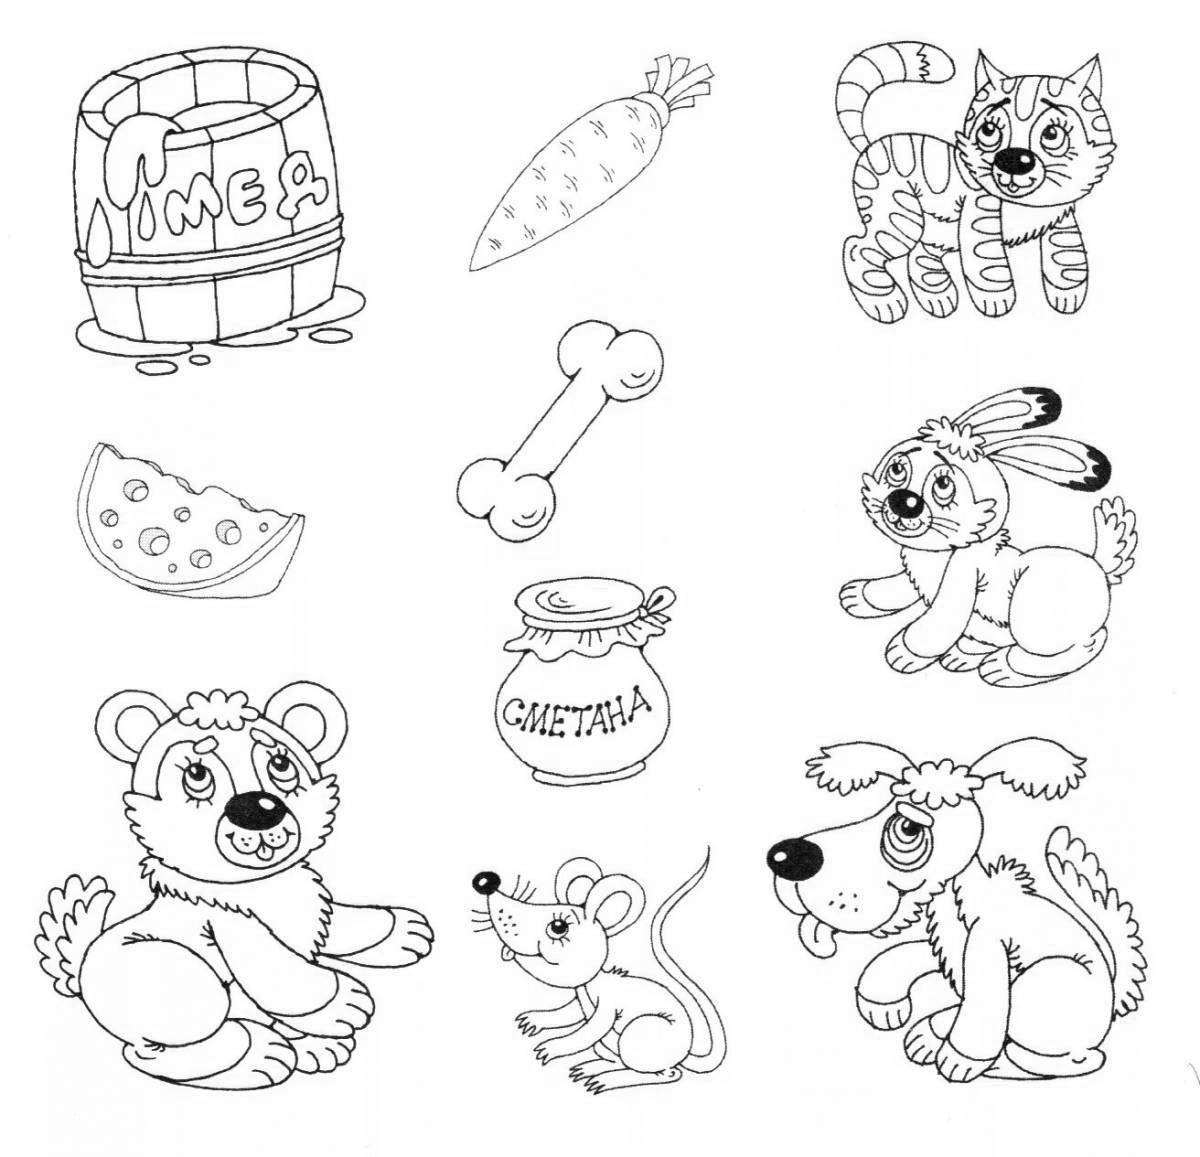 Colourful exciting coloring page select